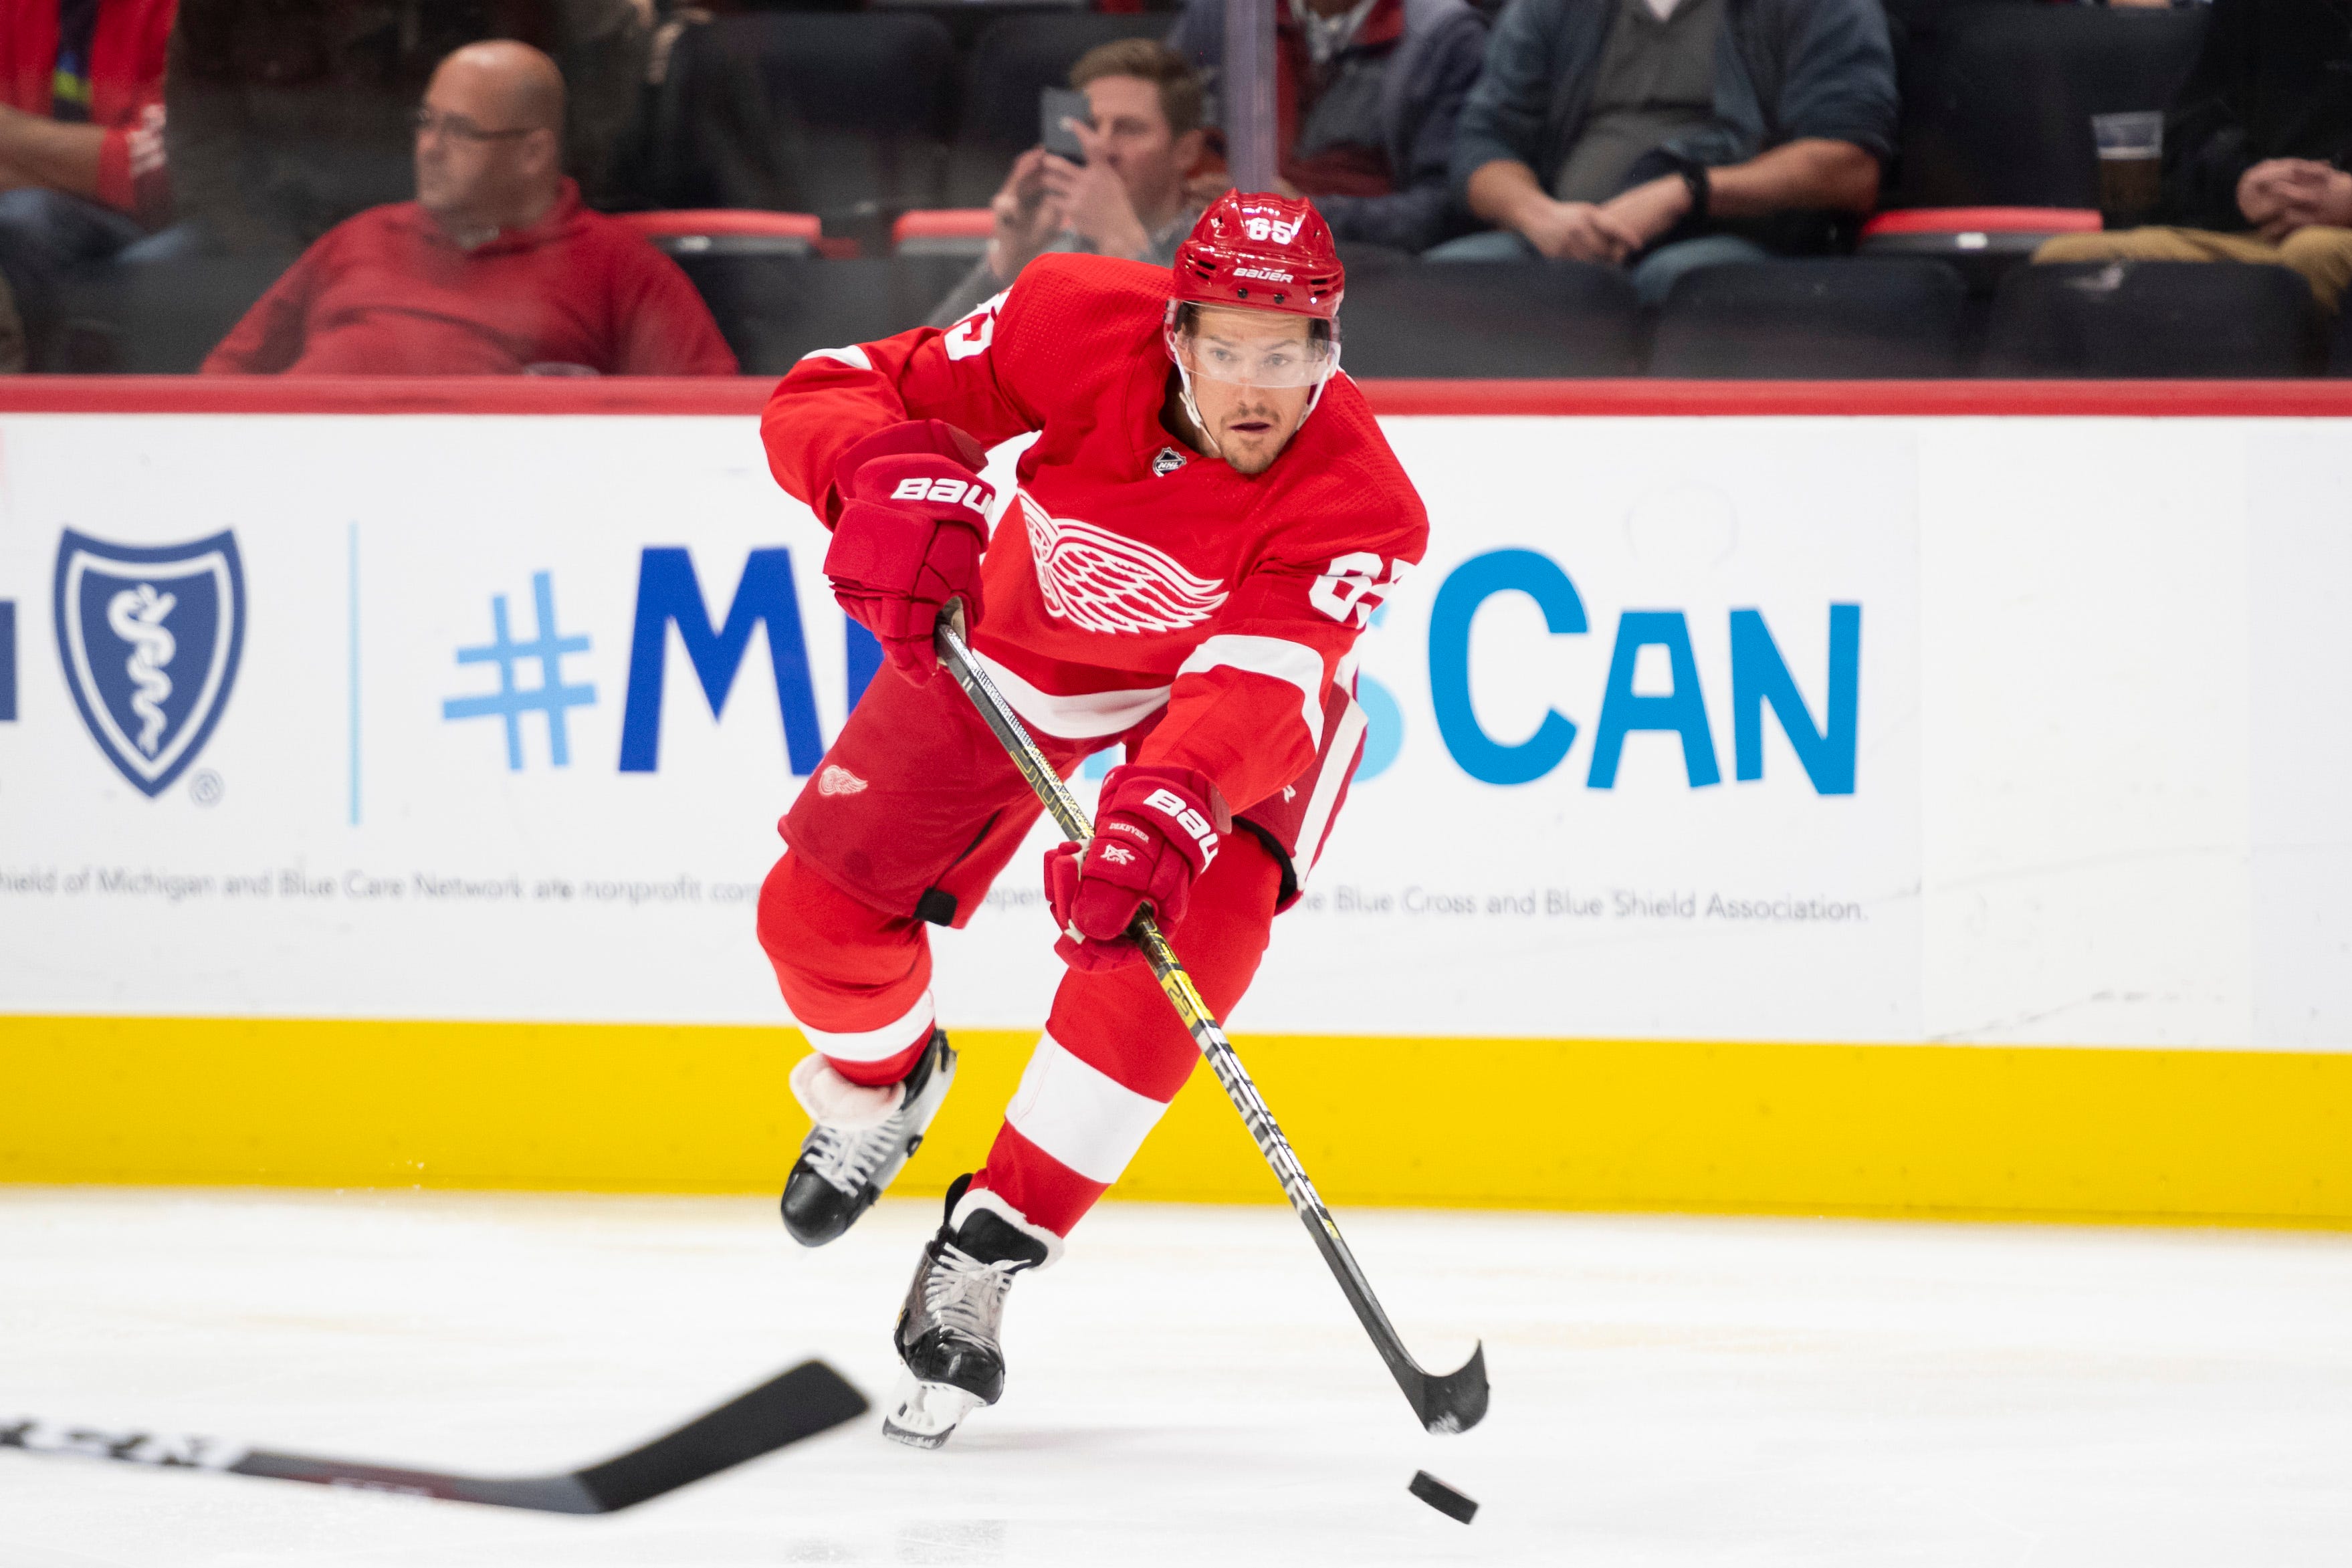 Danny DeKeyser
Age: 30. Ht: 6-3. Wt: 190
2019-20 statistics: Eight games, zero goals, four assists, four points
Analysis: Returning after herniated disk surgery, which cost DeKeyser essentially the entire season. Looked good in camp, but the Wings likely will bring along DeKeyser slowly.